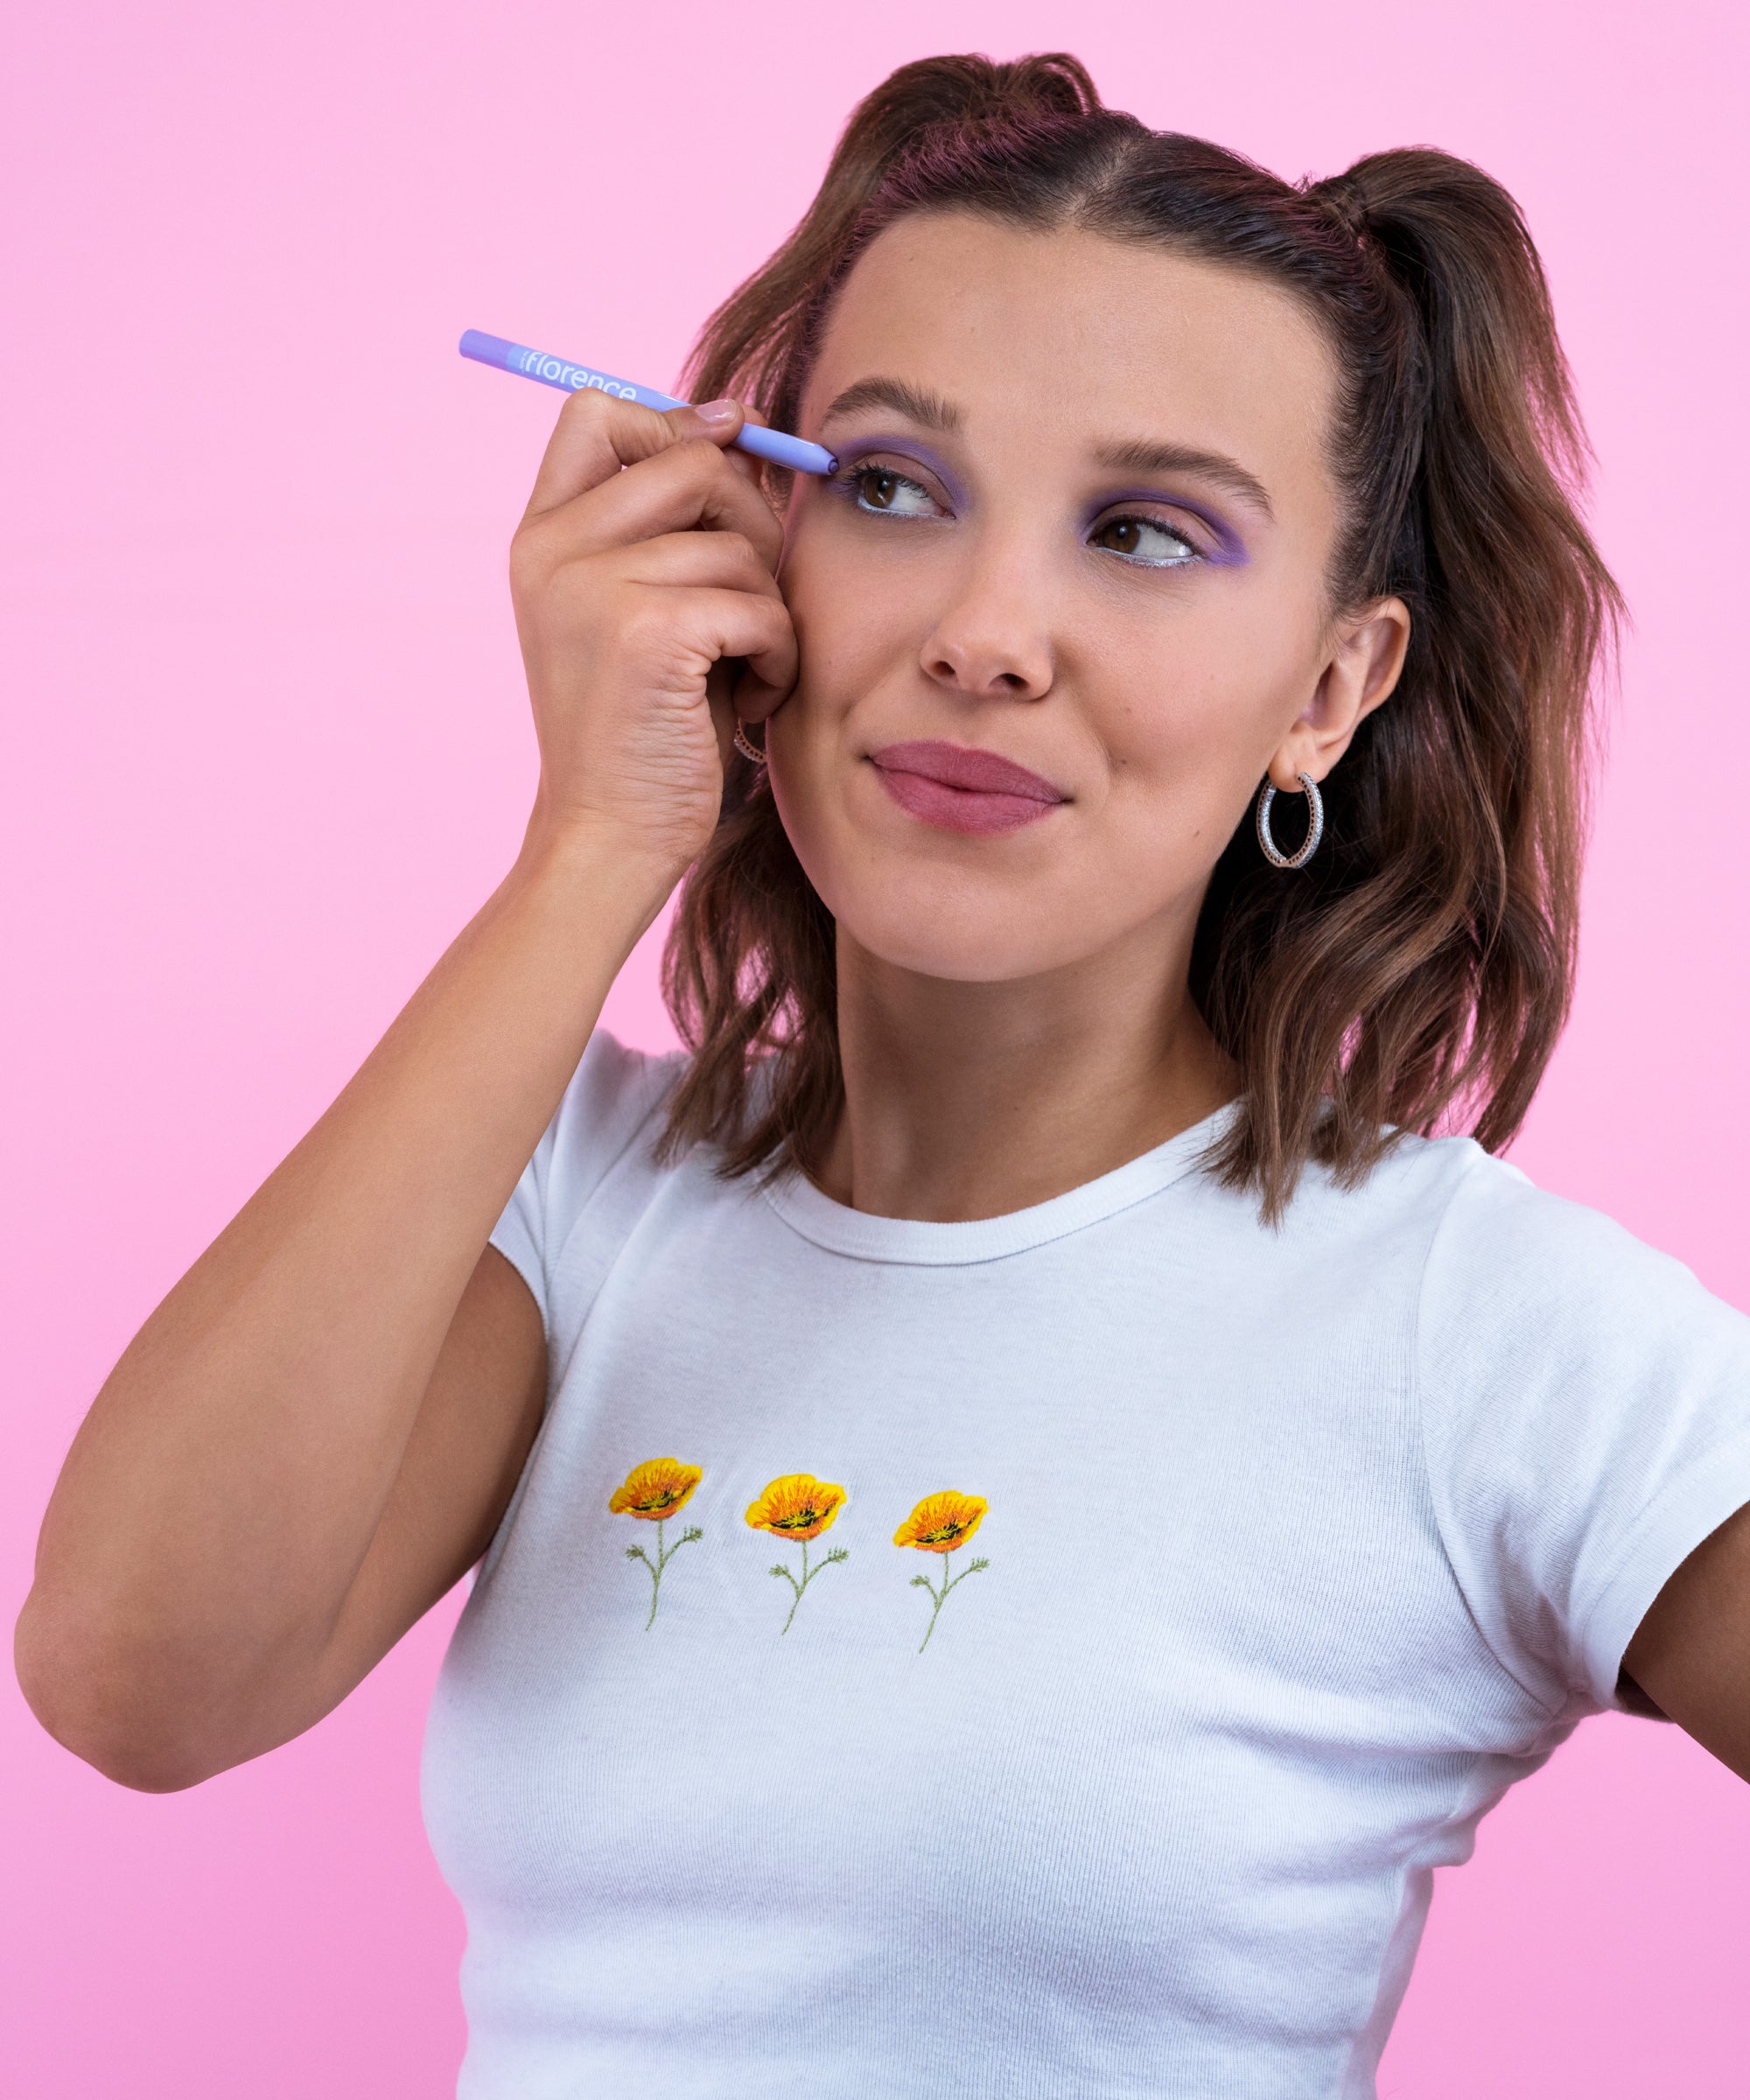 Millie Bobby Brown's Line Florence by Mills Is Now Available in Canada